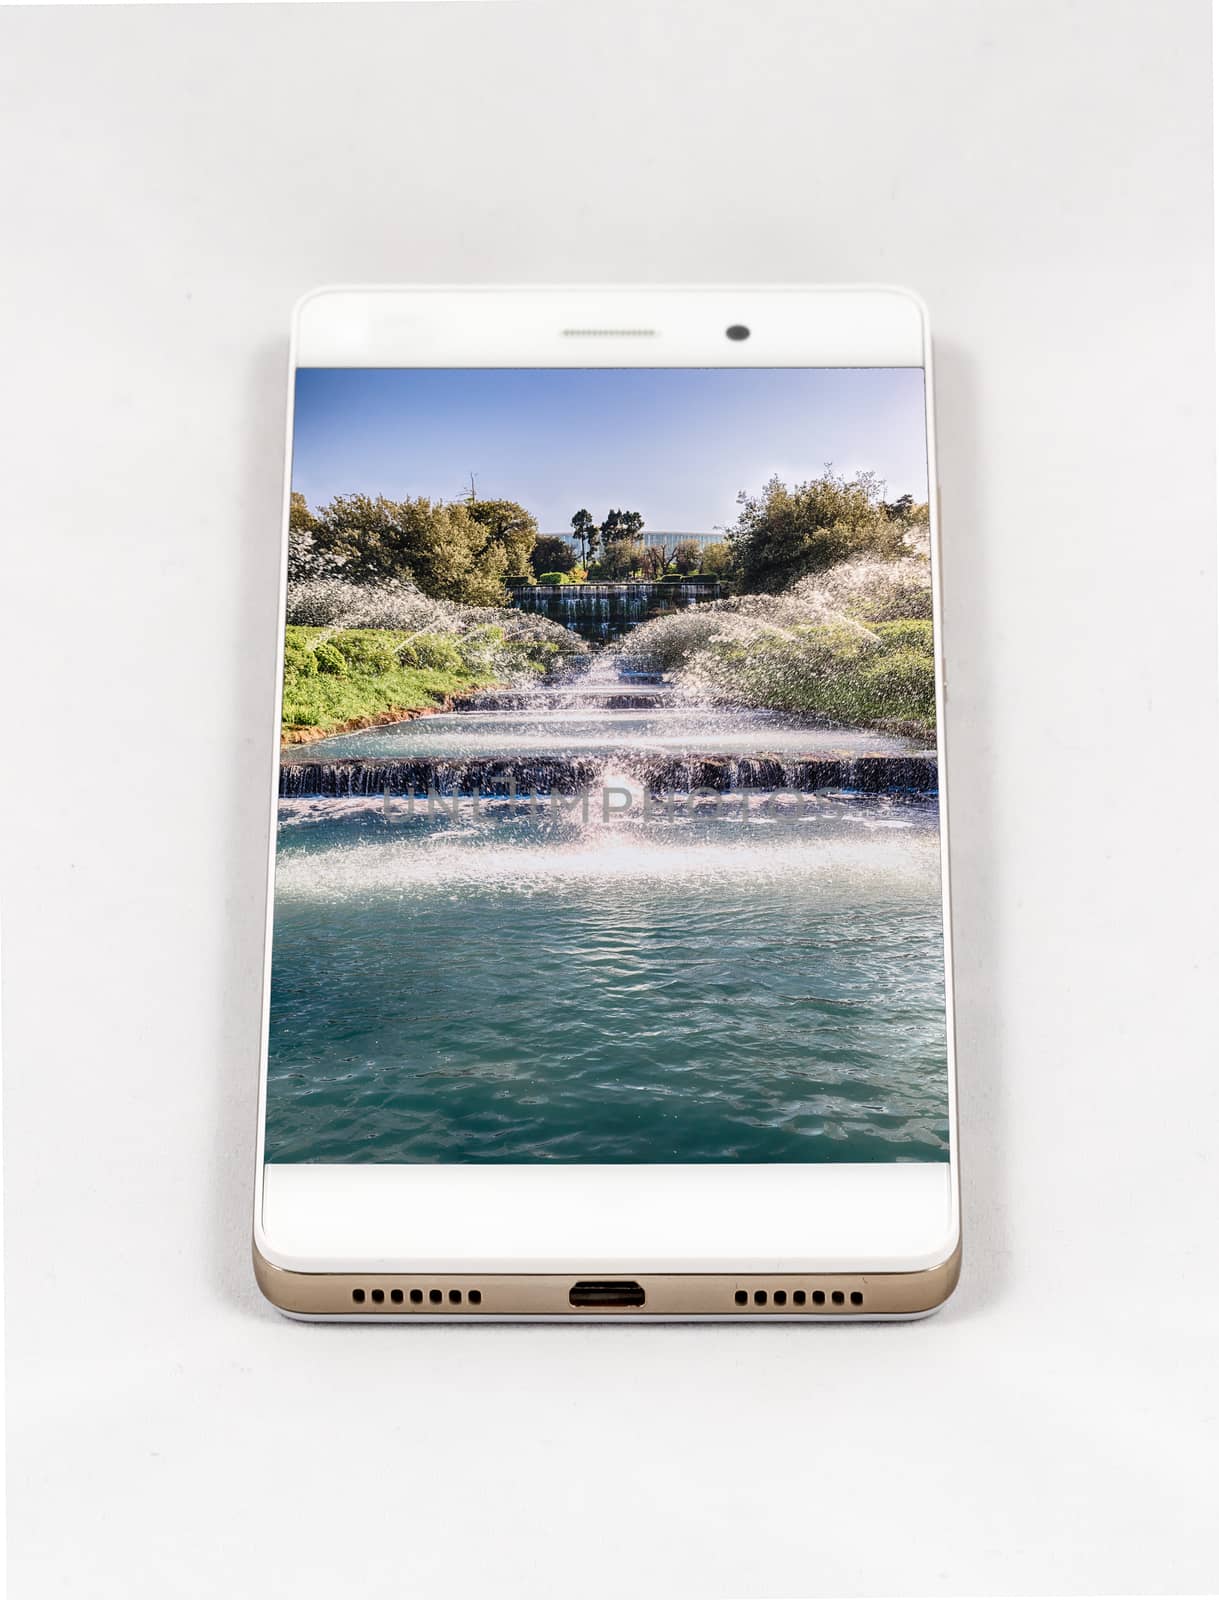 Modern smartphone displaying picture of waterfall in Rome, Italy by marcorubino